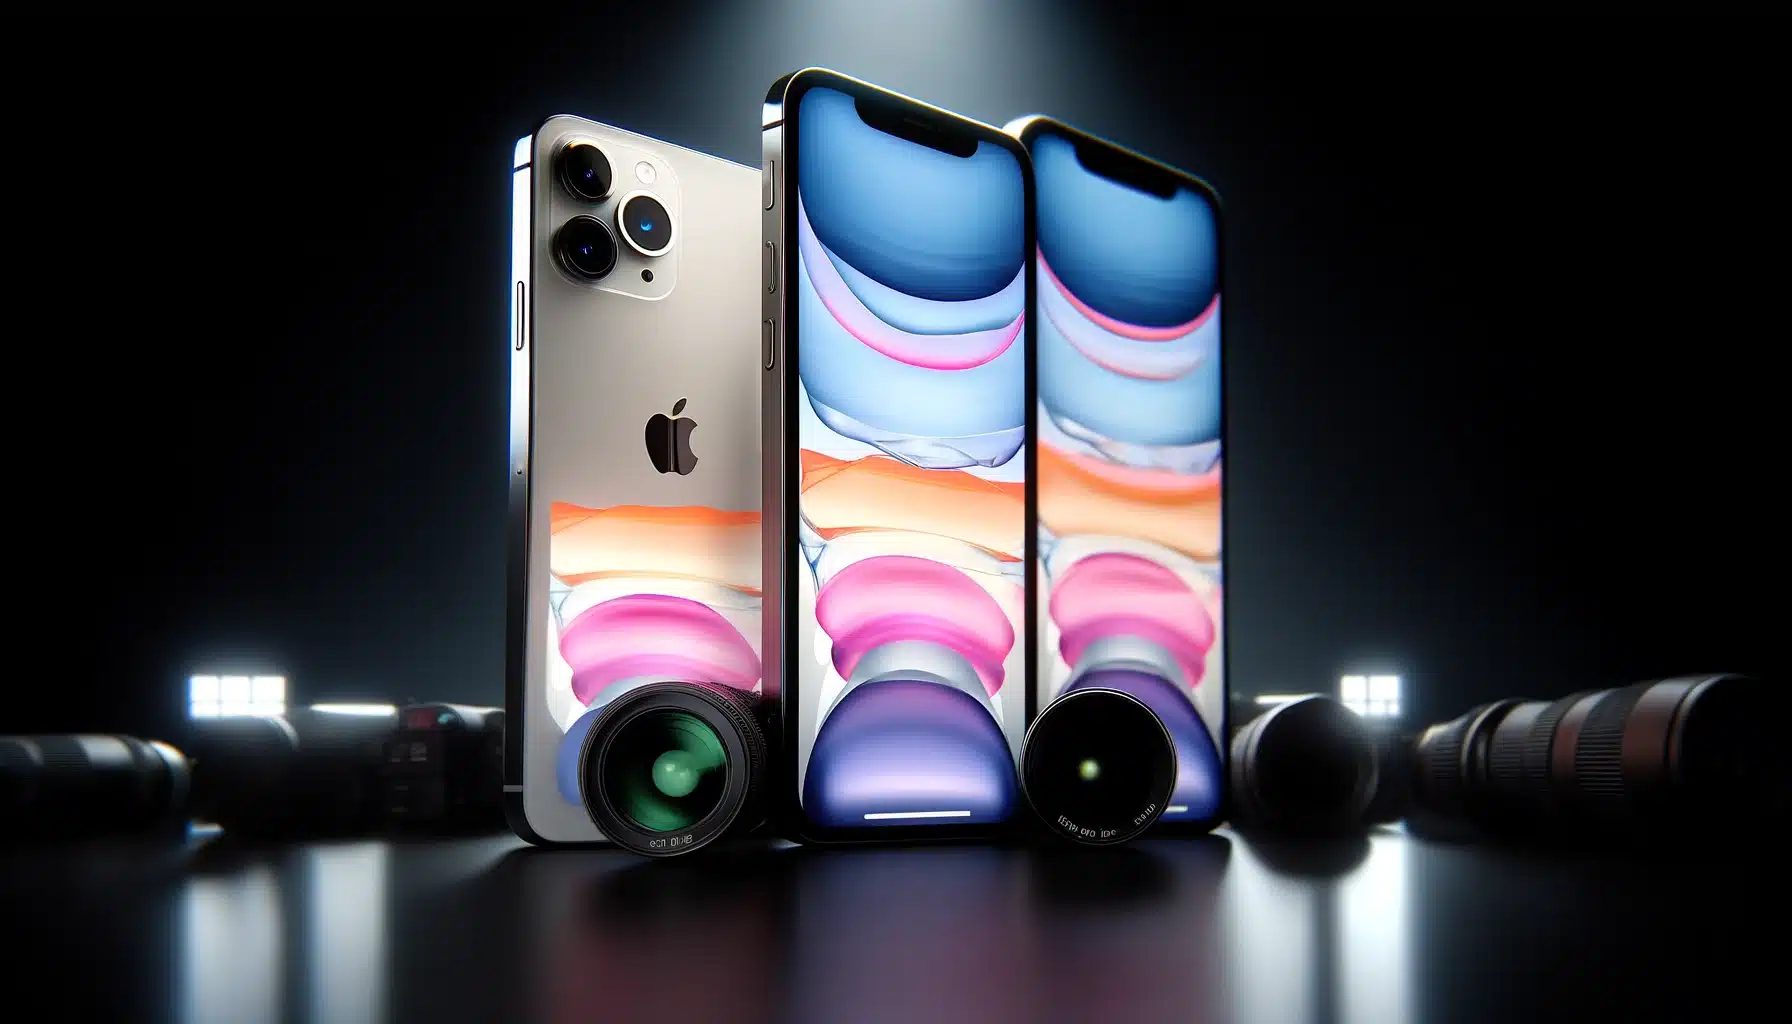 Photograph of iPhone 16, 16 Pro, and 16 Pro Max highlighting their advanced camera features, including telephoto lenses and macro photography capabilities.